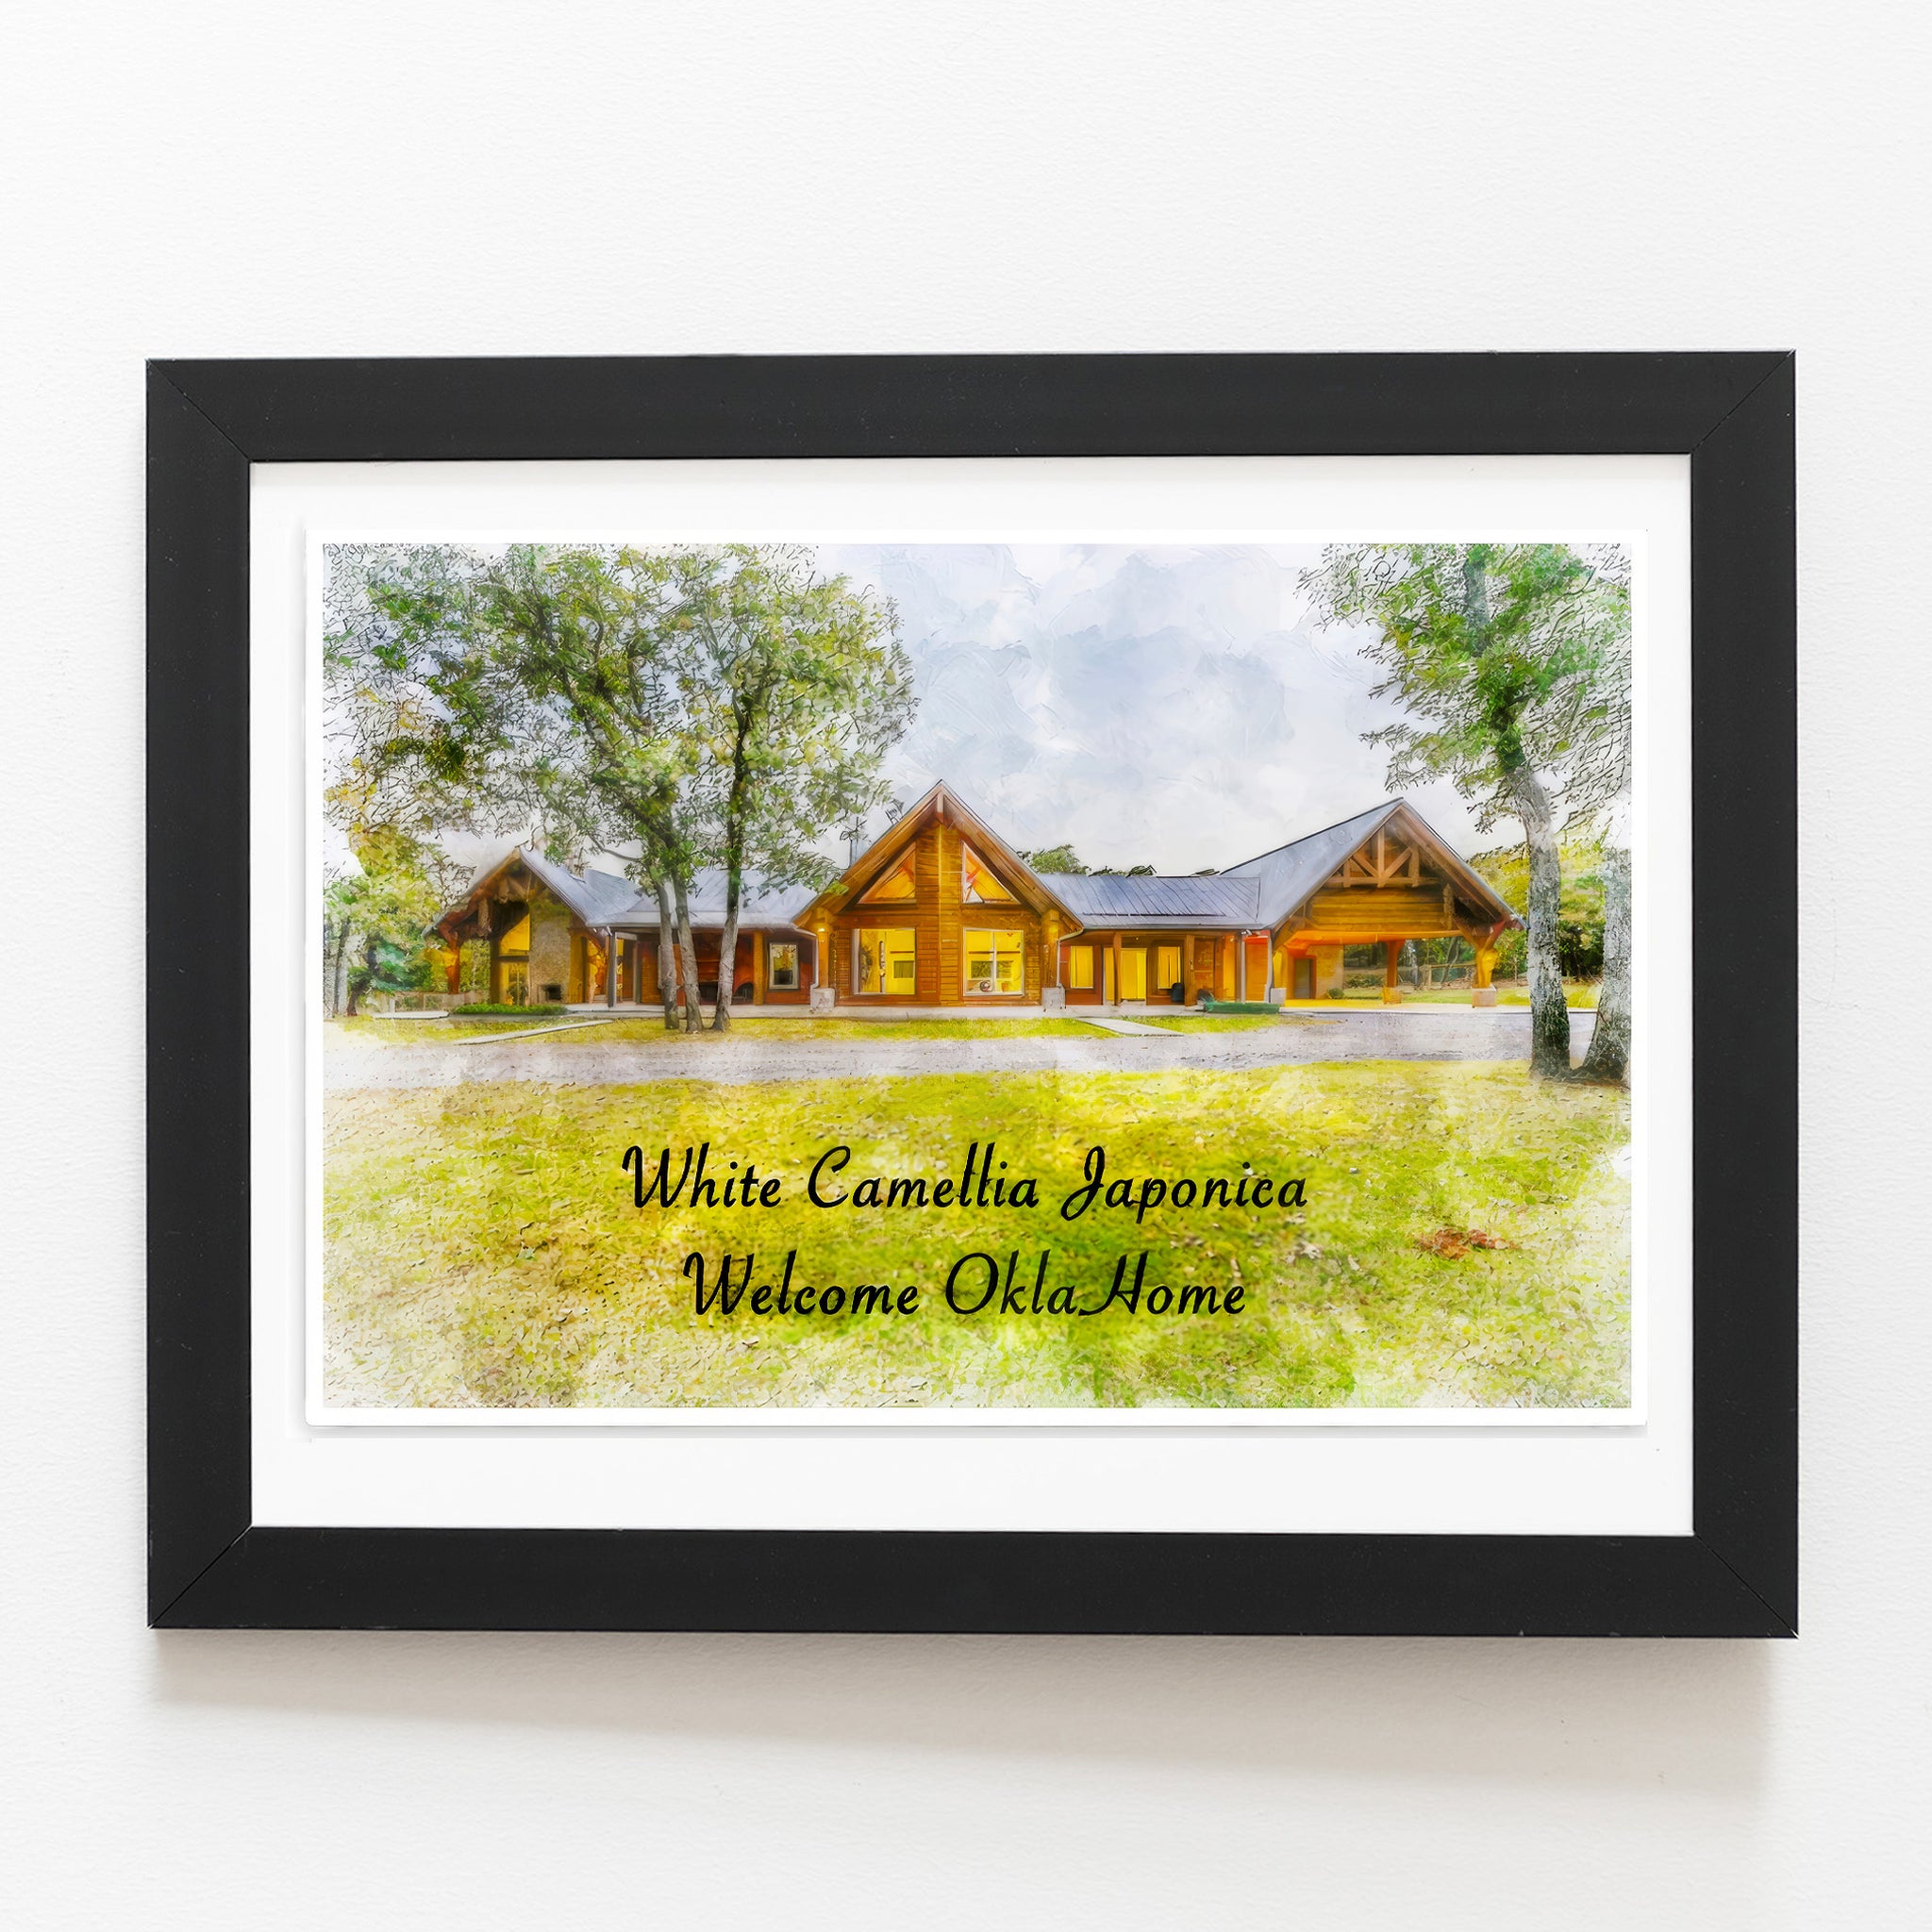 Realtor Closing Gifts | Custom House Portraits | Real Estate Agent Closing Gift Ideas | EXPRESS SHIPPING - FromPicToArt